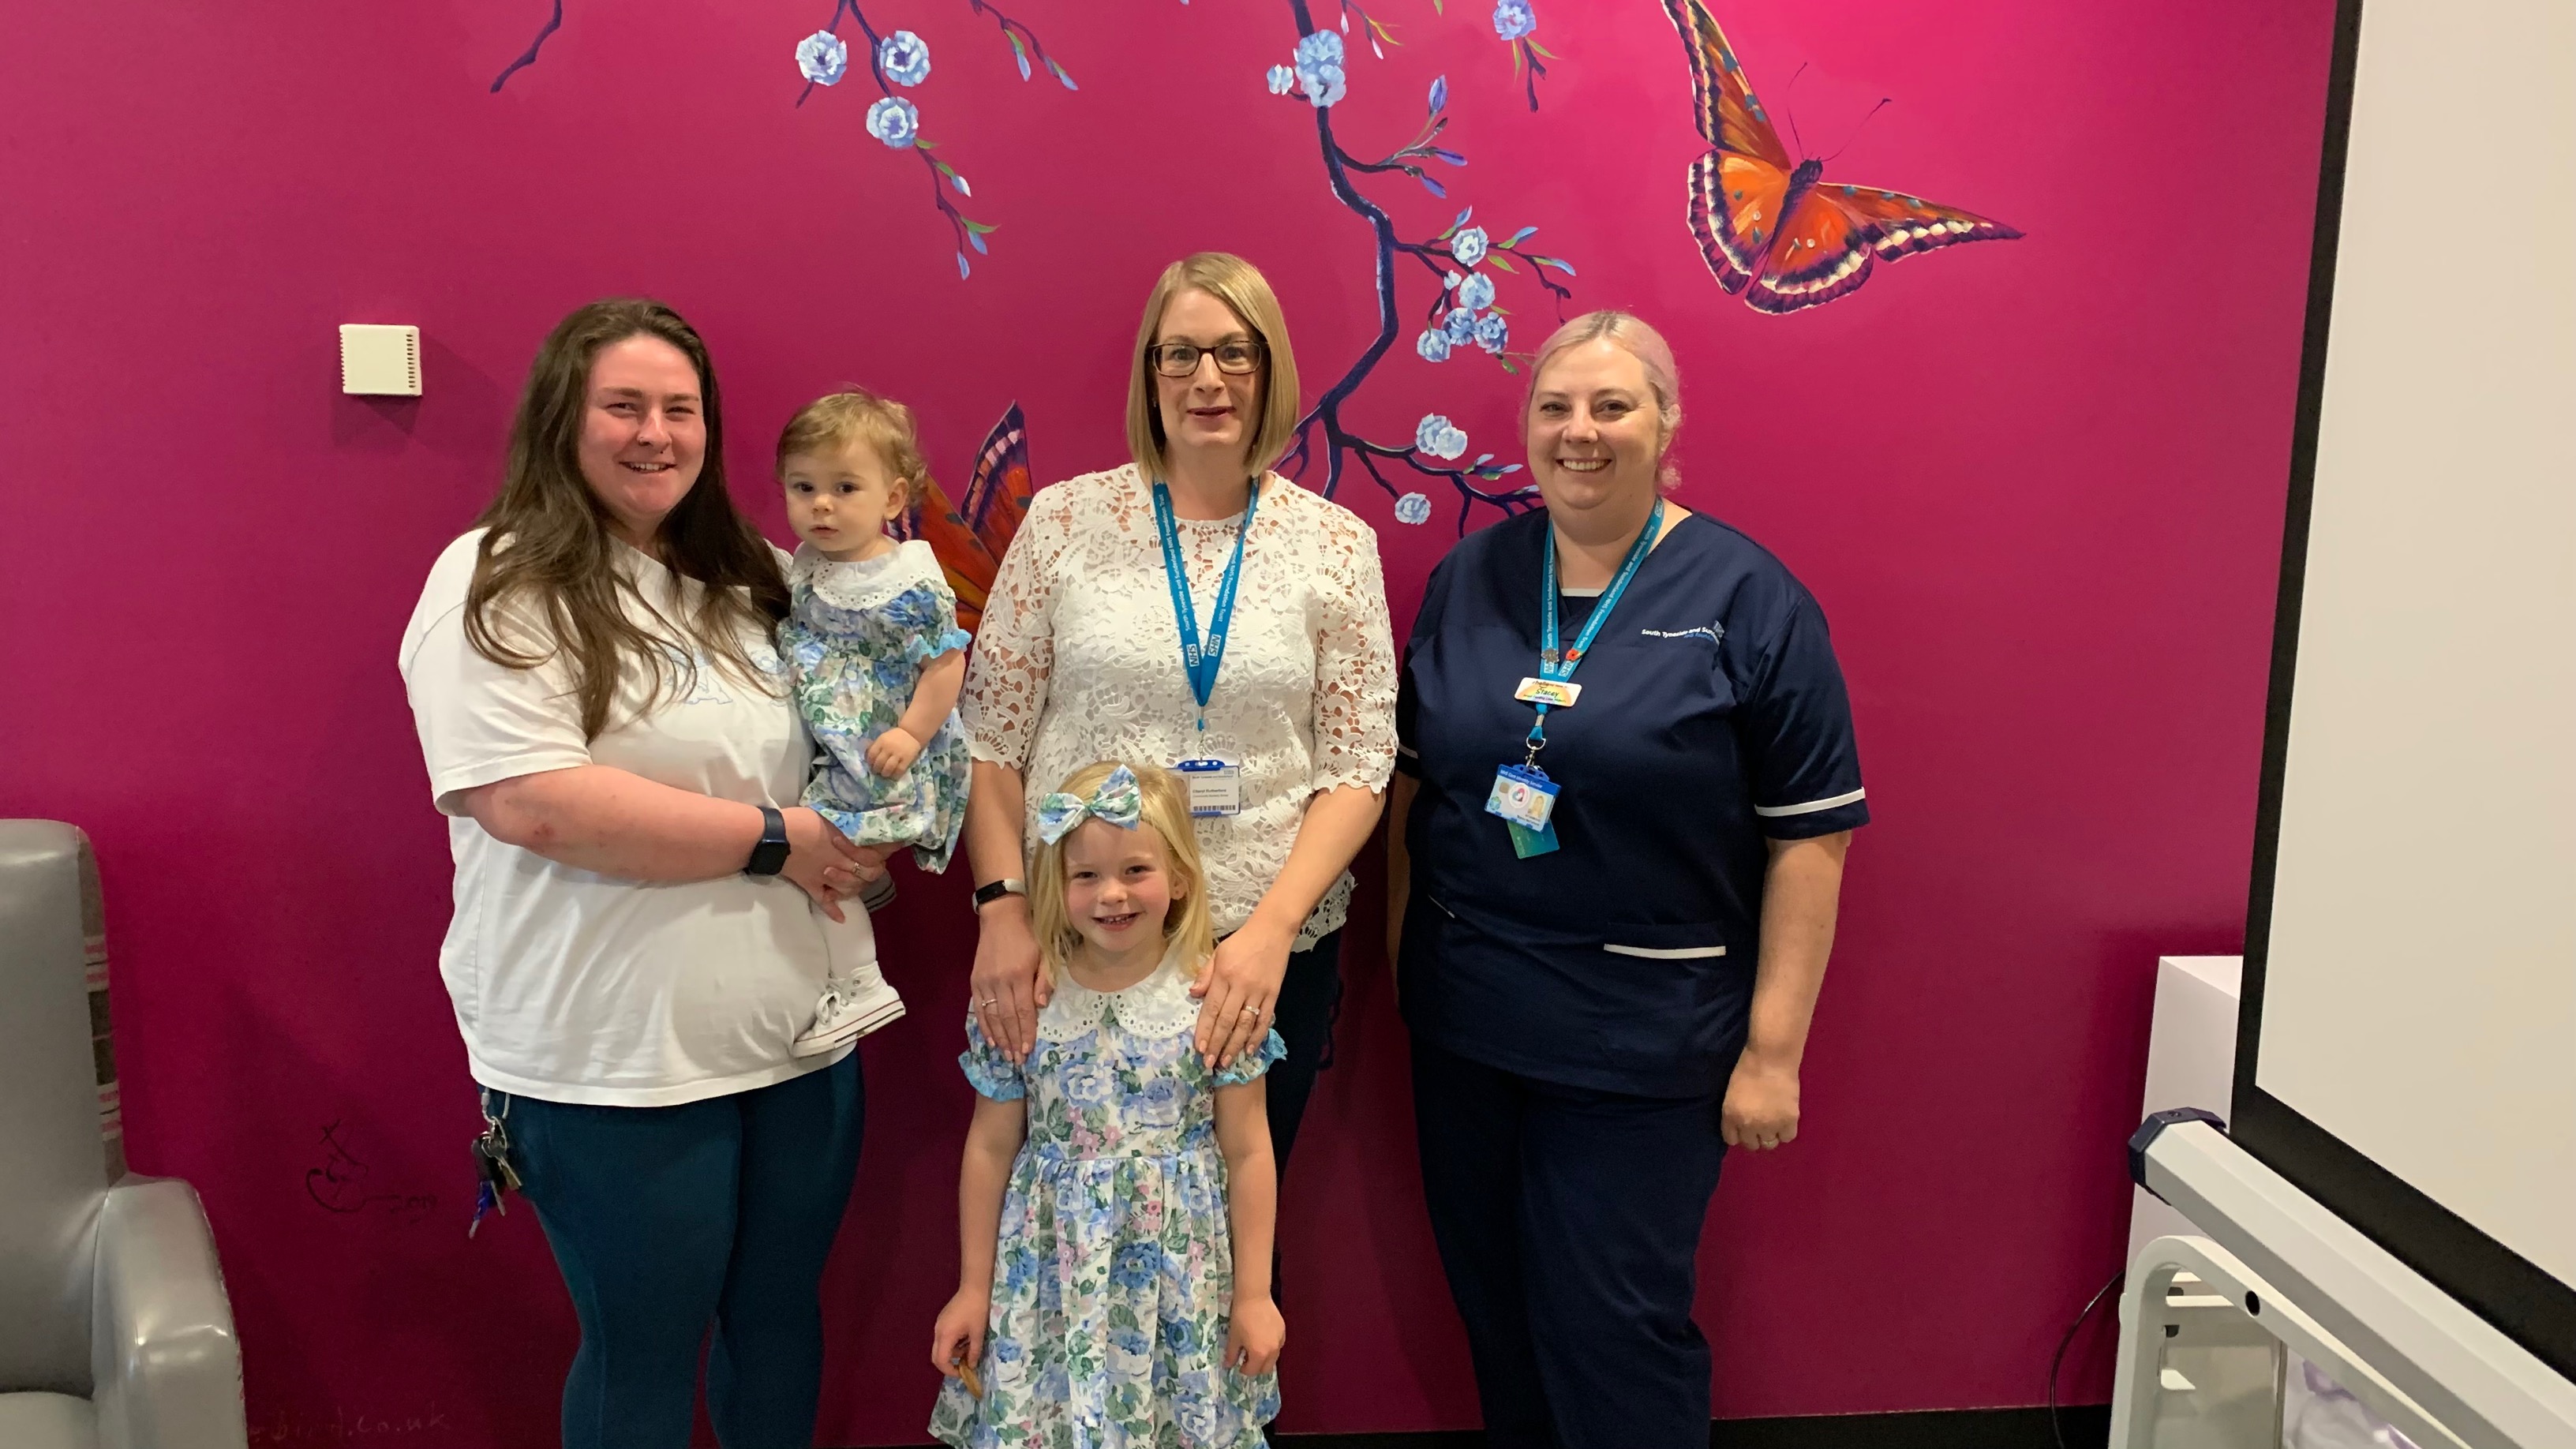 Angel Puttock with daughters Mazikeen and Octavia and Community Nursery Nurse Cheryl Rutherford and Stacey McFarlane, the Trust’s Infant Feeding Lead for Midwifery..jpg